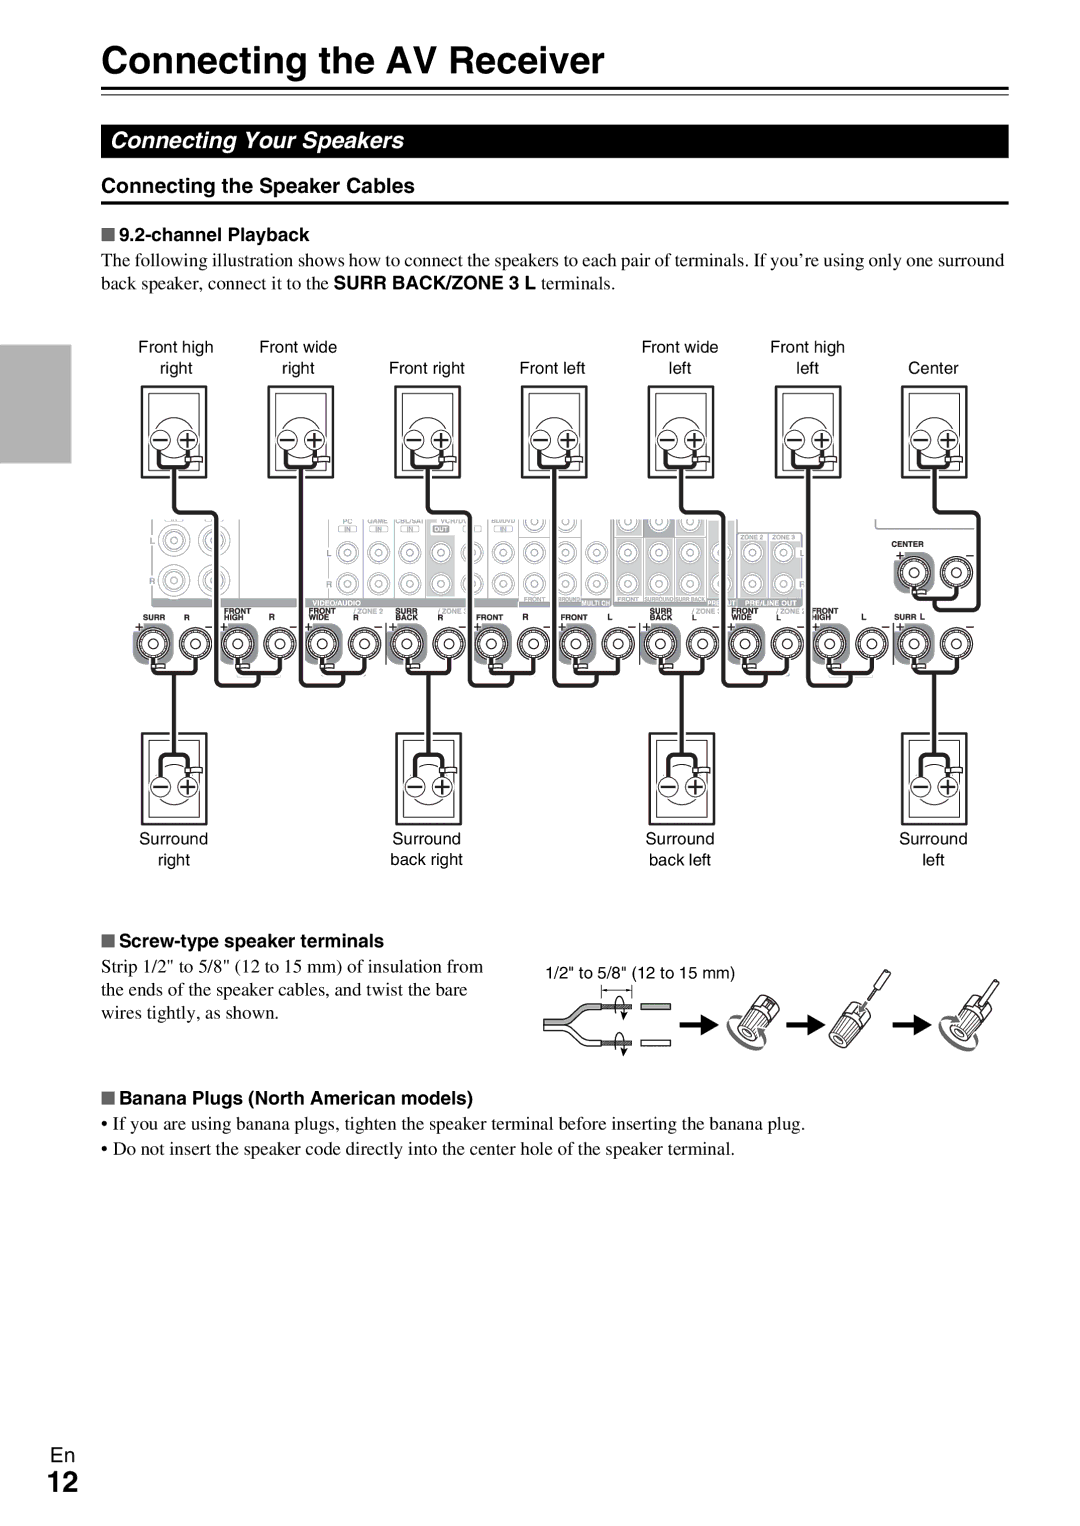 Onkyo TX-NR5009 instruction manual Connecting the AV Receiver, Connecting Your Speakers, Connecting the Speaker Cables 